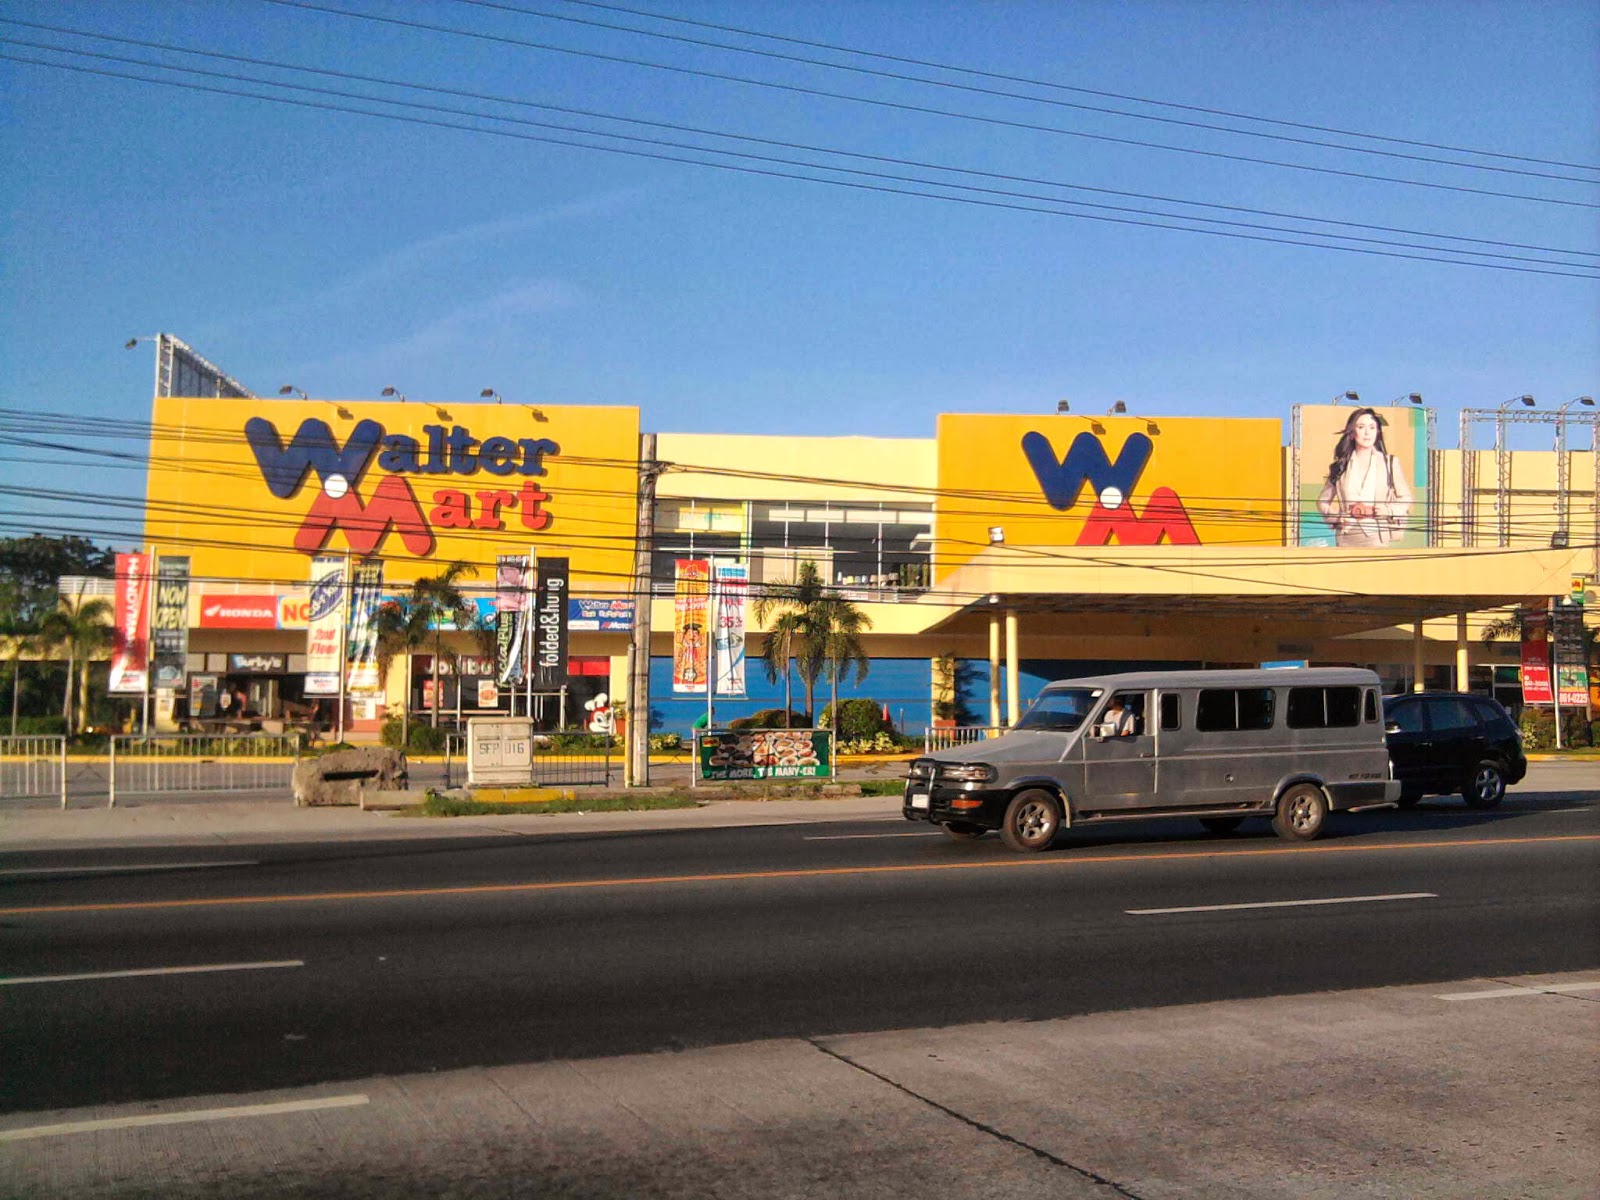 SM and Waltermart join forces - The Products Blog